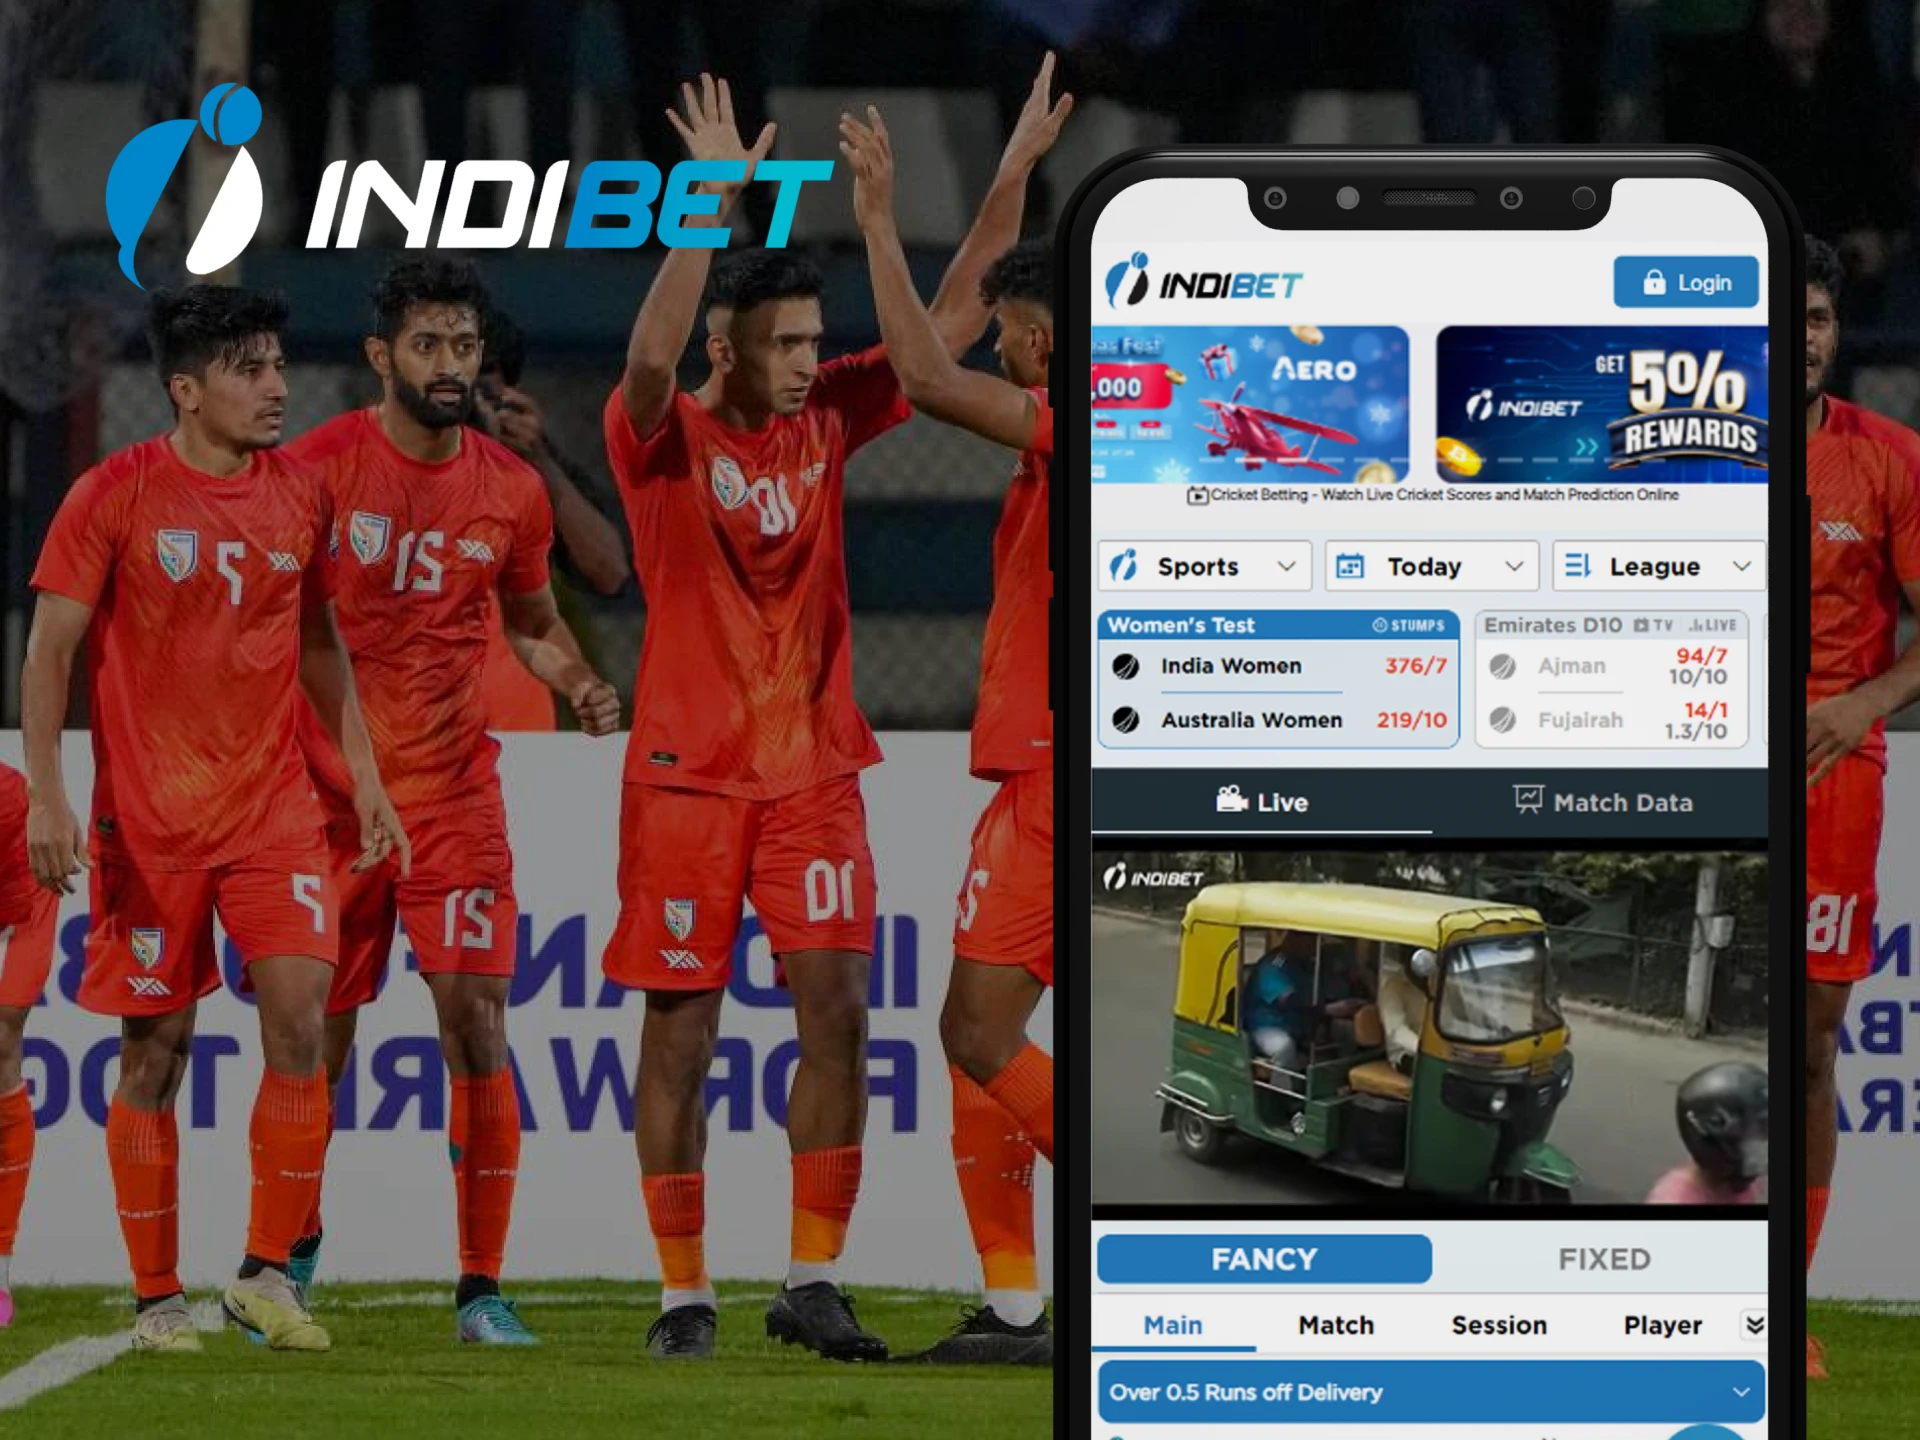 The Indibet app is a bookmaker focused on sporting events.